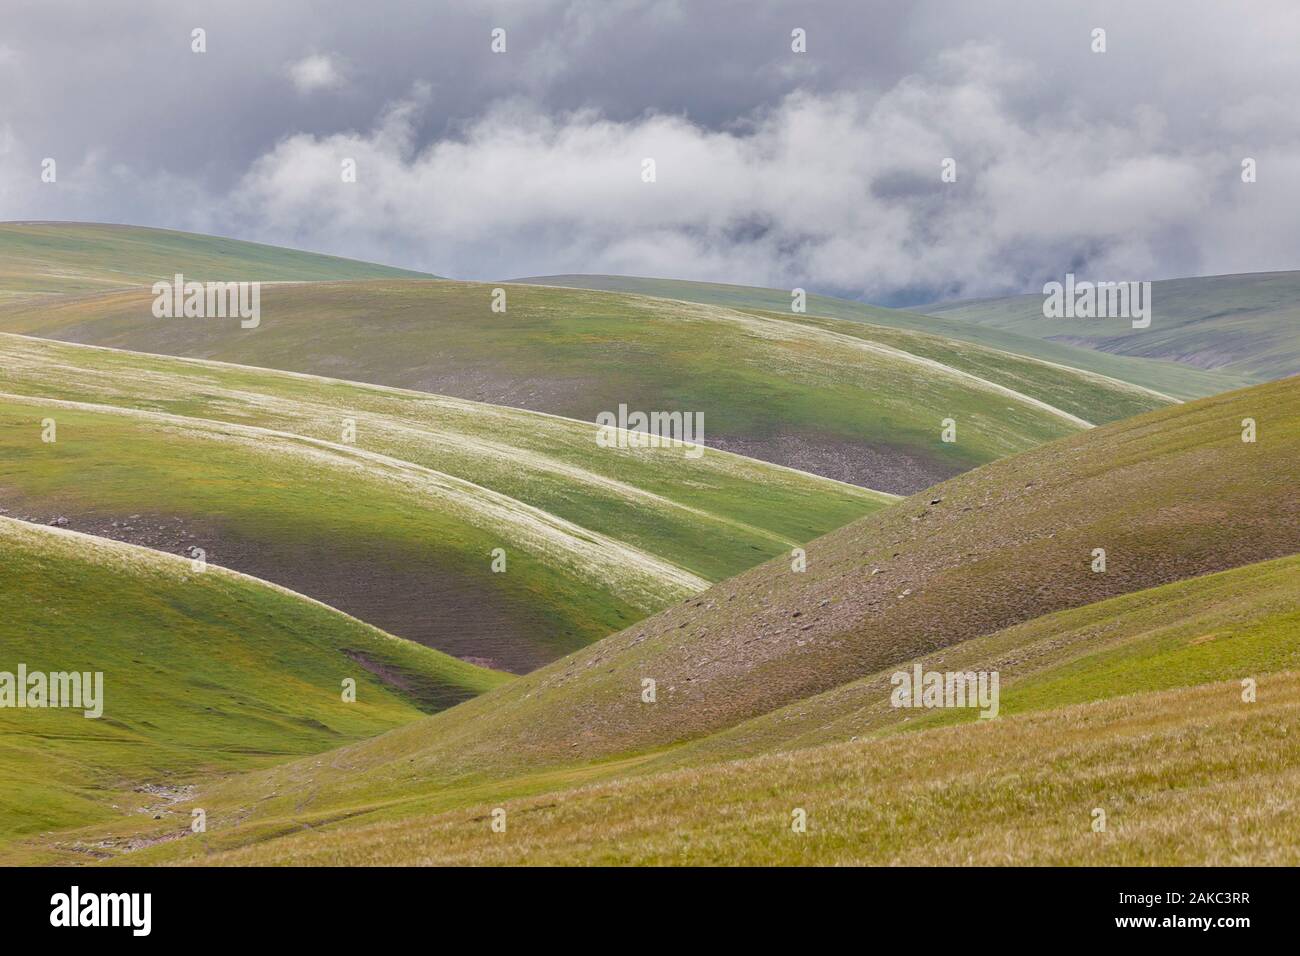 Kyrgyzstan, Osh province, Sary-Moghul, green hills and stormy sky Stock Photo